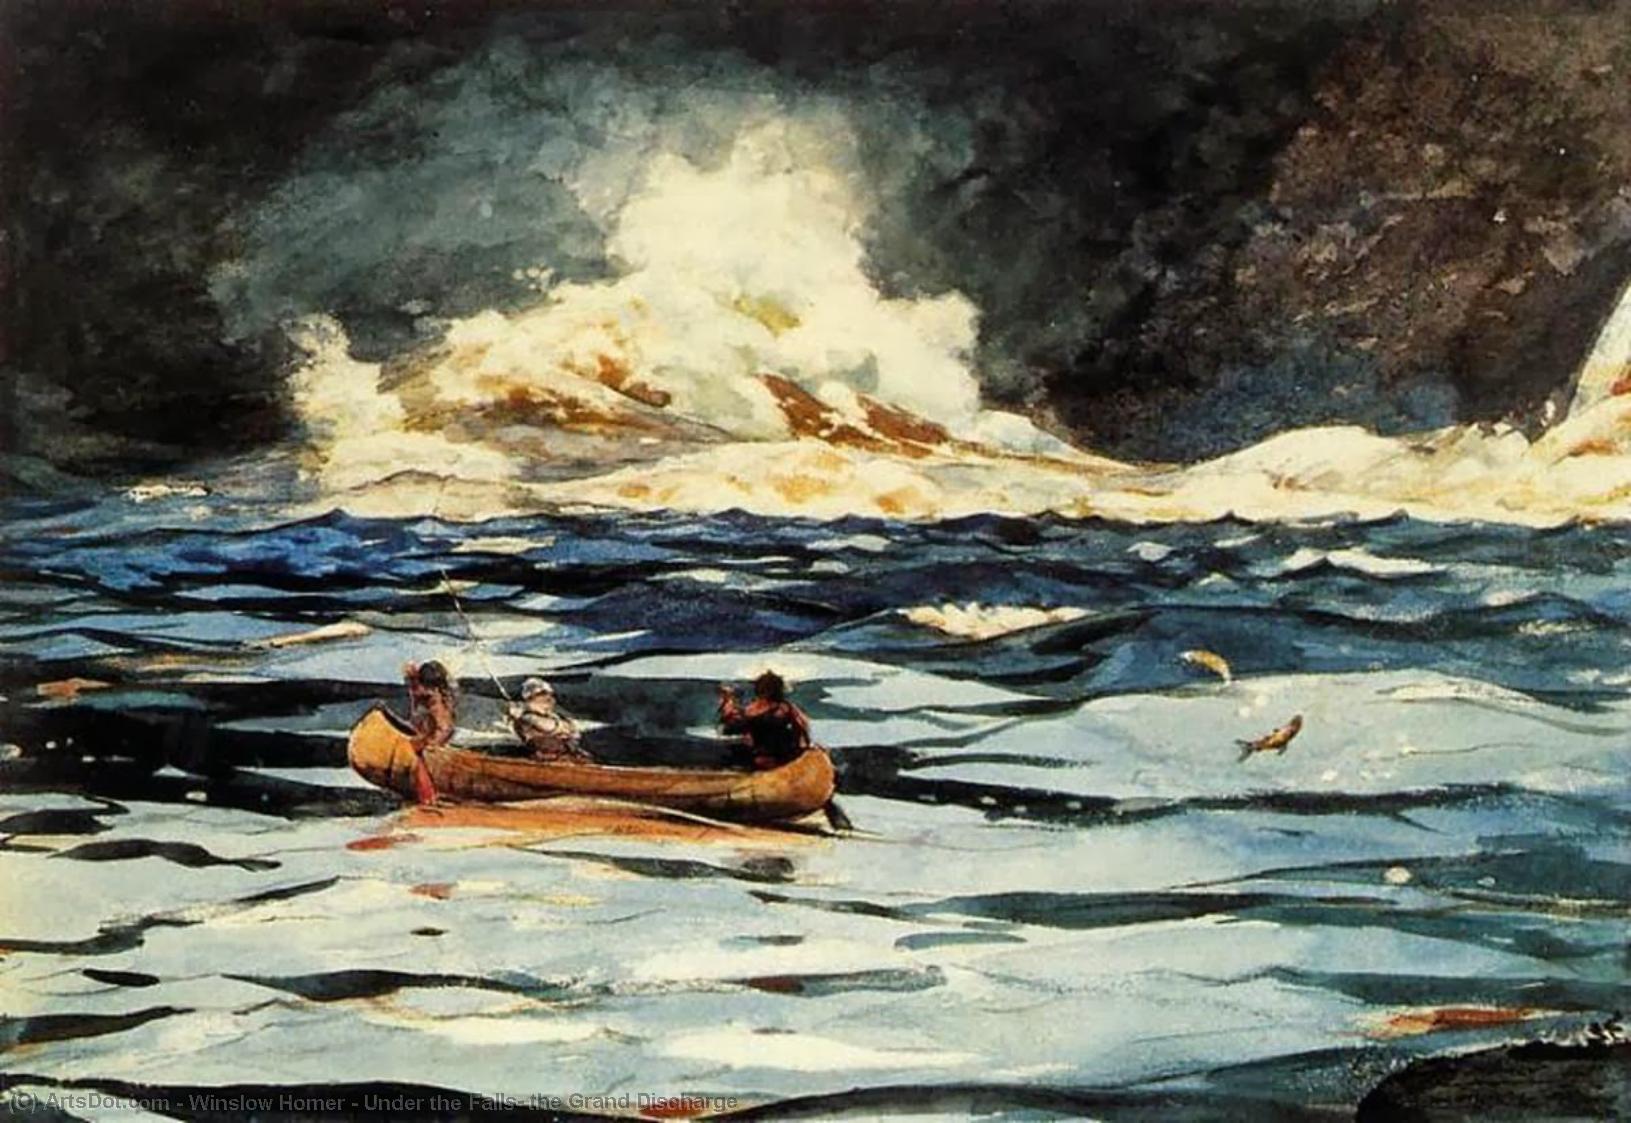 WikiOO.org - Encyclopedia of Fine Arts - Lukisan, Artwork Winslow Homer - Under the Falls, the Grand Discharge